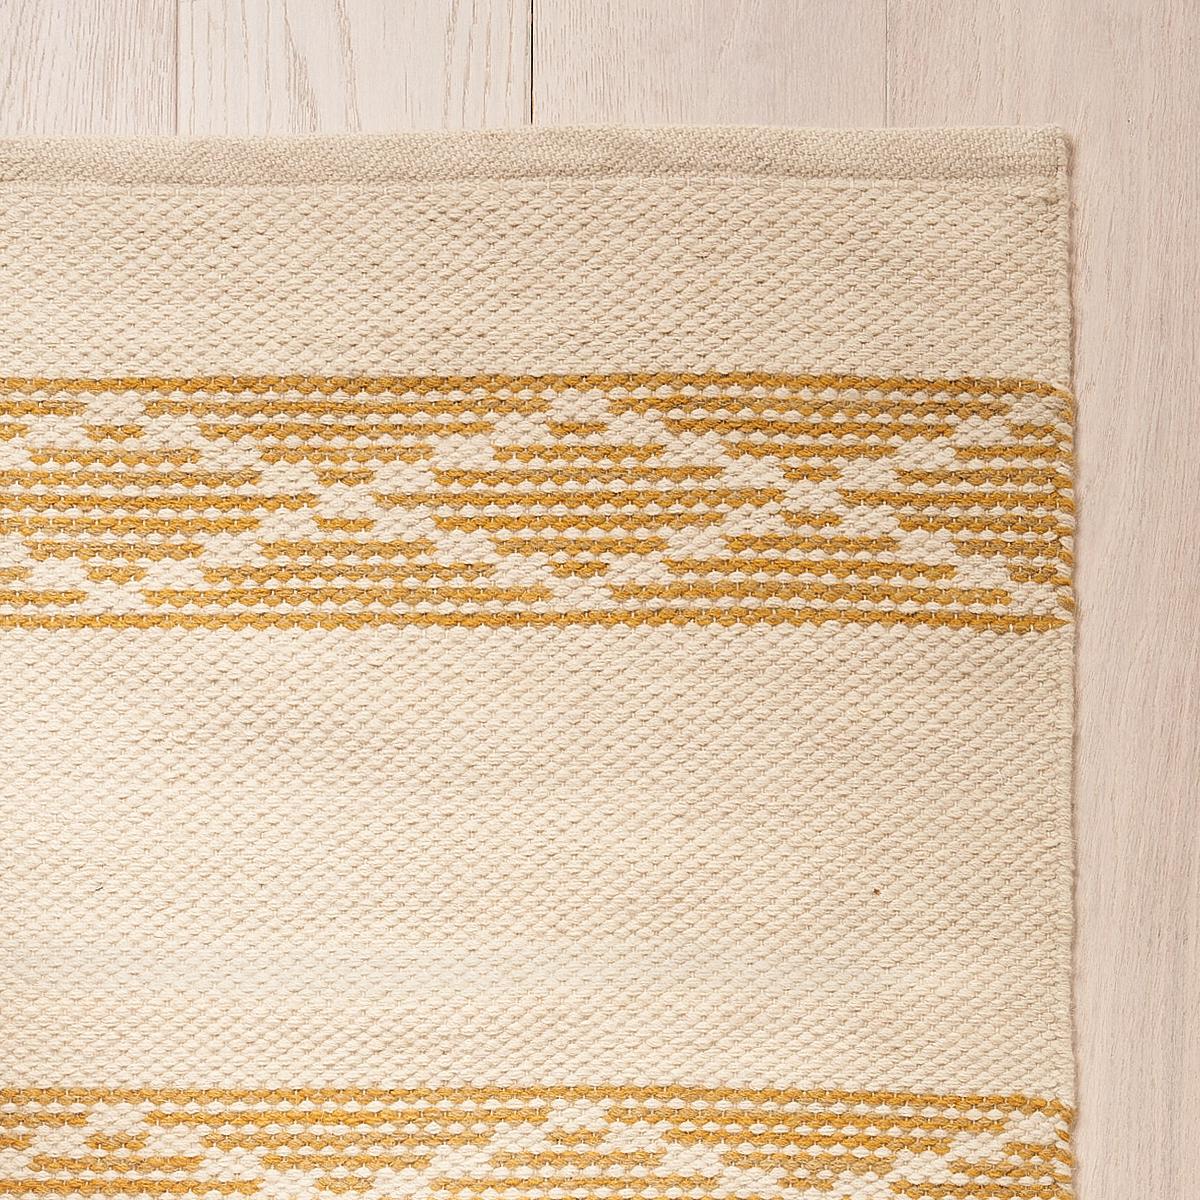 This rug will ship in December. A tight, stable weave of wool and cotton, Sequoia Stripe is a versatile geometric pattern with a unique lattice detail. Inspired by our popular Sequoia Stripe fabric and wallpaper designs, it has an understated,